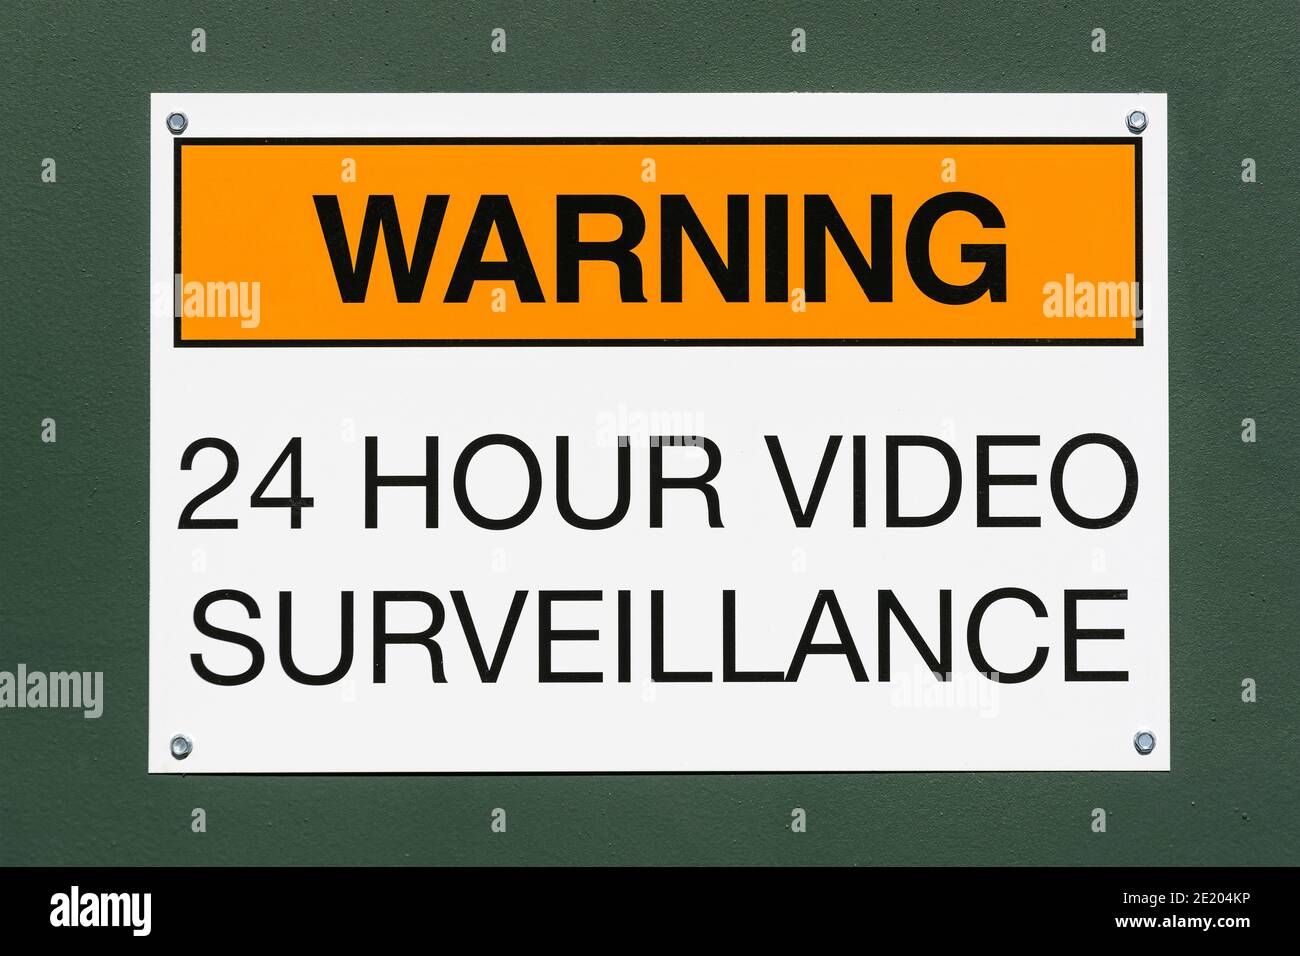 Warning 24 hour video surveillance sign on green metal background. Stock Photo